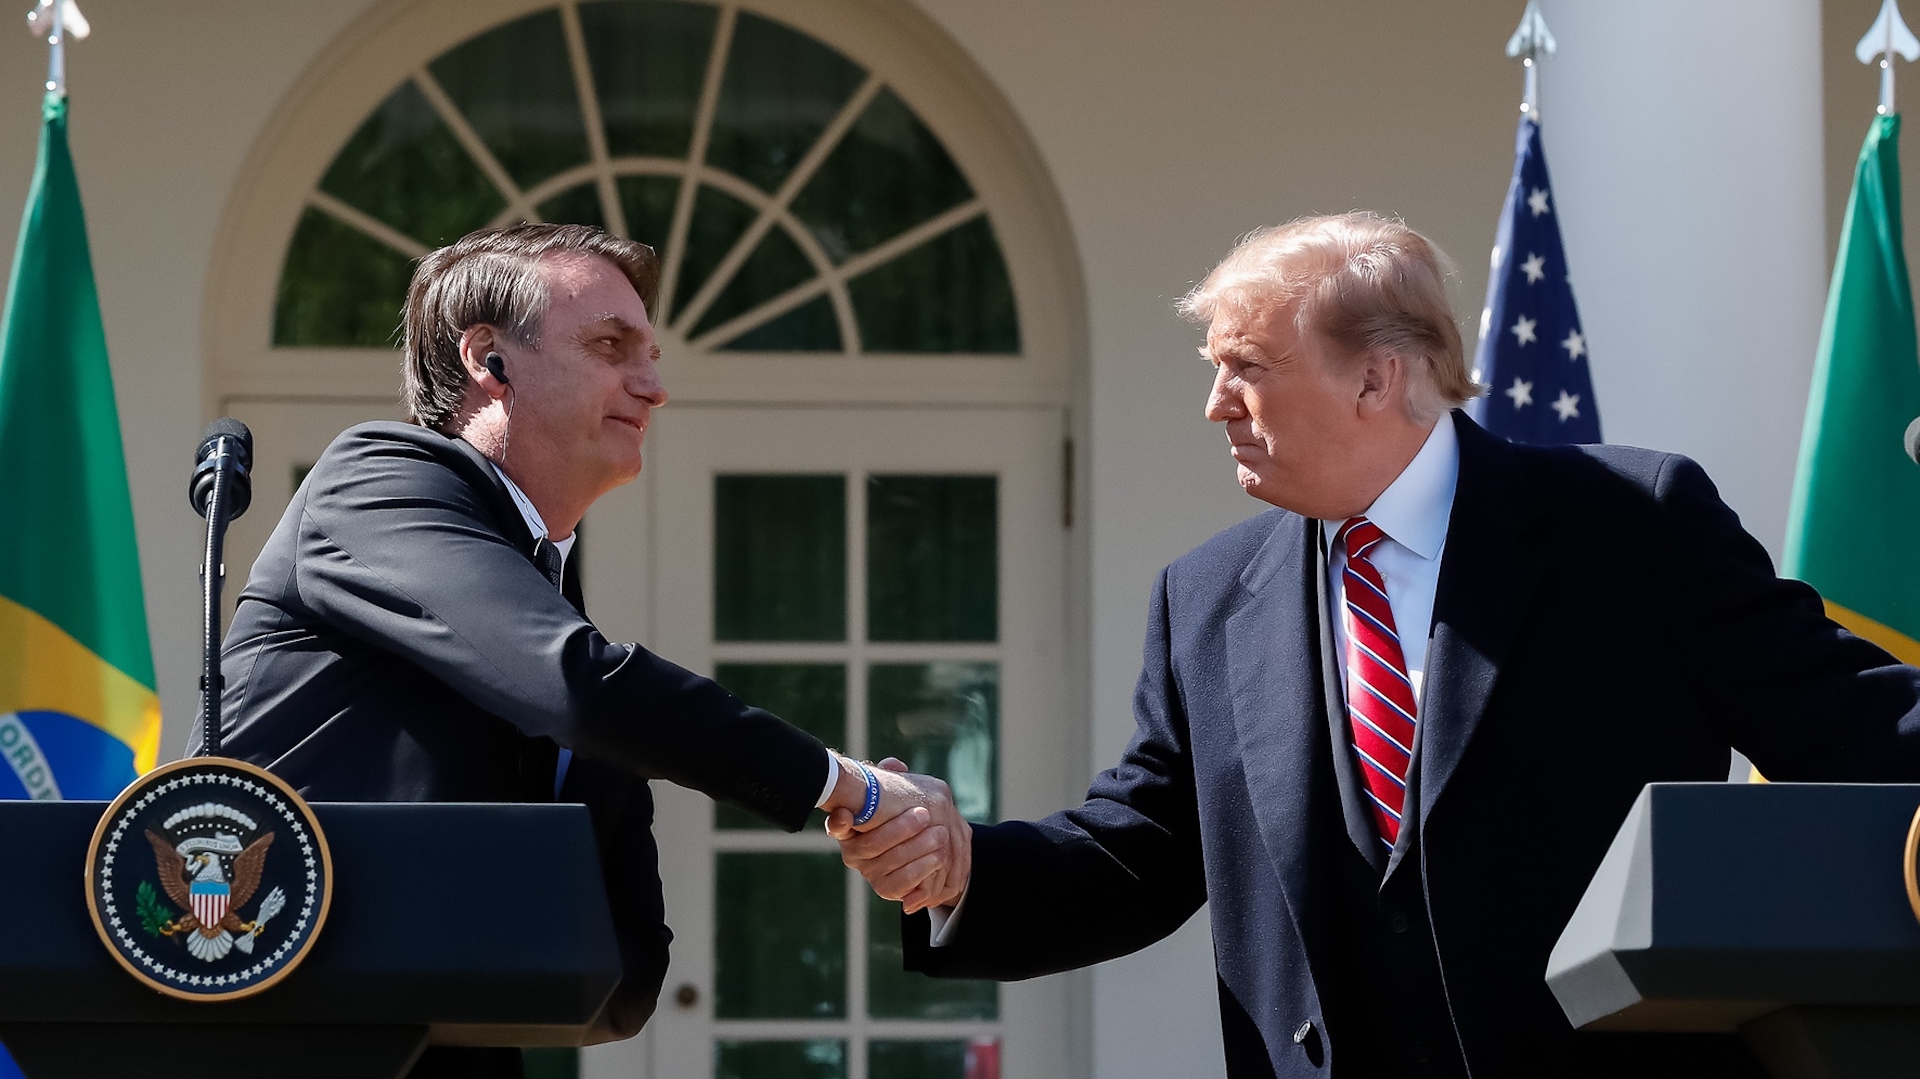 Brazil,Presidents Jair Bolsonaro and Donald Trump shake hands at the White House after two days of meetings.